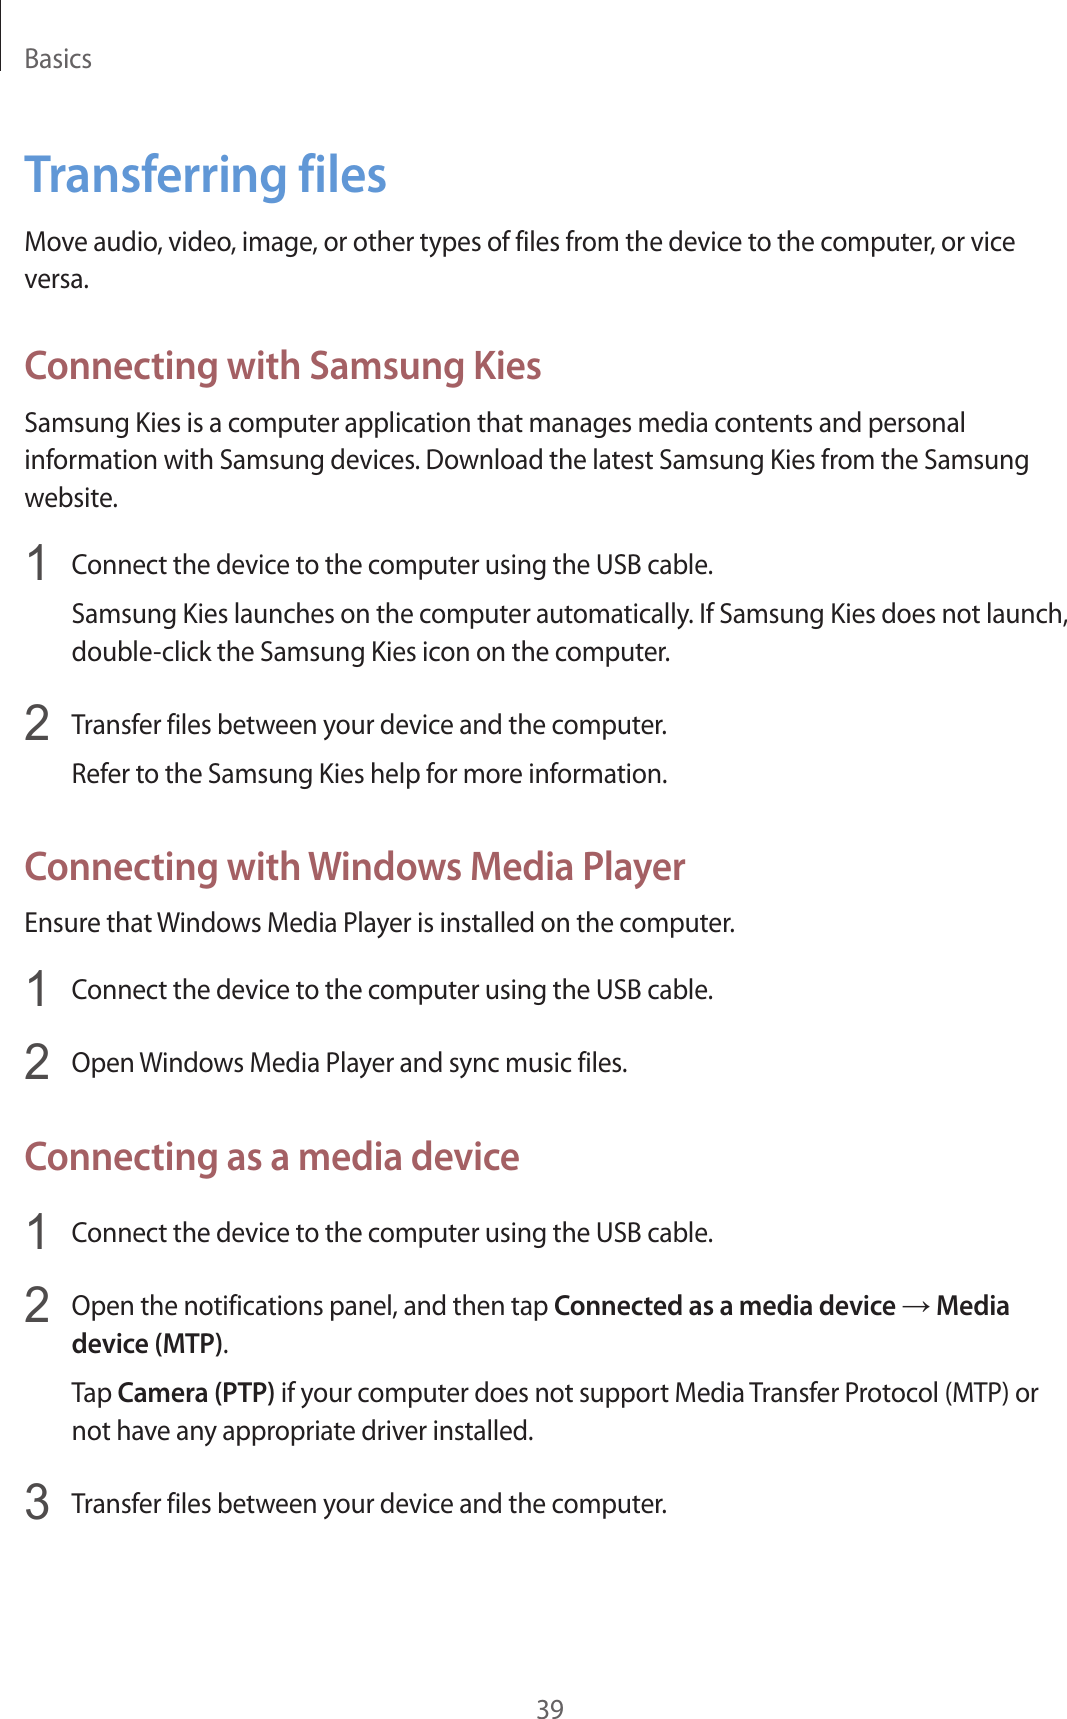 Basics39Transferring filesMove audio, video, image, or other types of files from the device to the computer, or vice versa.Connecting with Samsung KiesSamsung Kies is a computer application that manages media contents and personal information with Samsung devices. Download the latest Samsung Kies from the Samsung website.1  Connect the device to the computer using the USB cable.Samsung Kies launches on the computer automatically. If Samsung Kies does not launch, double-click the Samsung Kies icon on the computer.2  Transfer files between your device and the computer.Refer to the Samsung Kies help for more information.Connecting with Windows Media PlayerEnsure that Windows Media Player is installed on the computer.1  Connect the device to the computer using the USB cable.2  Open Windows Media Player and sync music files.Connecting as a media device1  Connect the device to the computer using the USB cable.2  Open the notifications panel, and then tap Connected as a media device → Media device (MTP).Tap Camera (PTP) if your computer does not support Media Transfer Protocol (MTP) or not have any appropriate driver installed.3  Transfer files between your device and the computer.